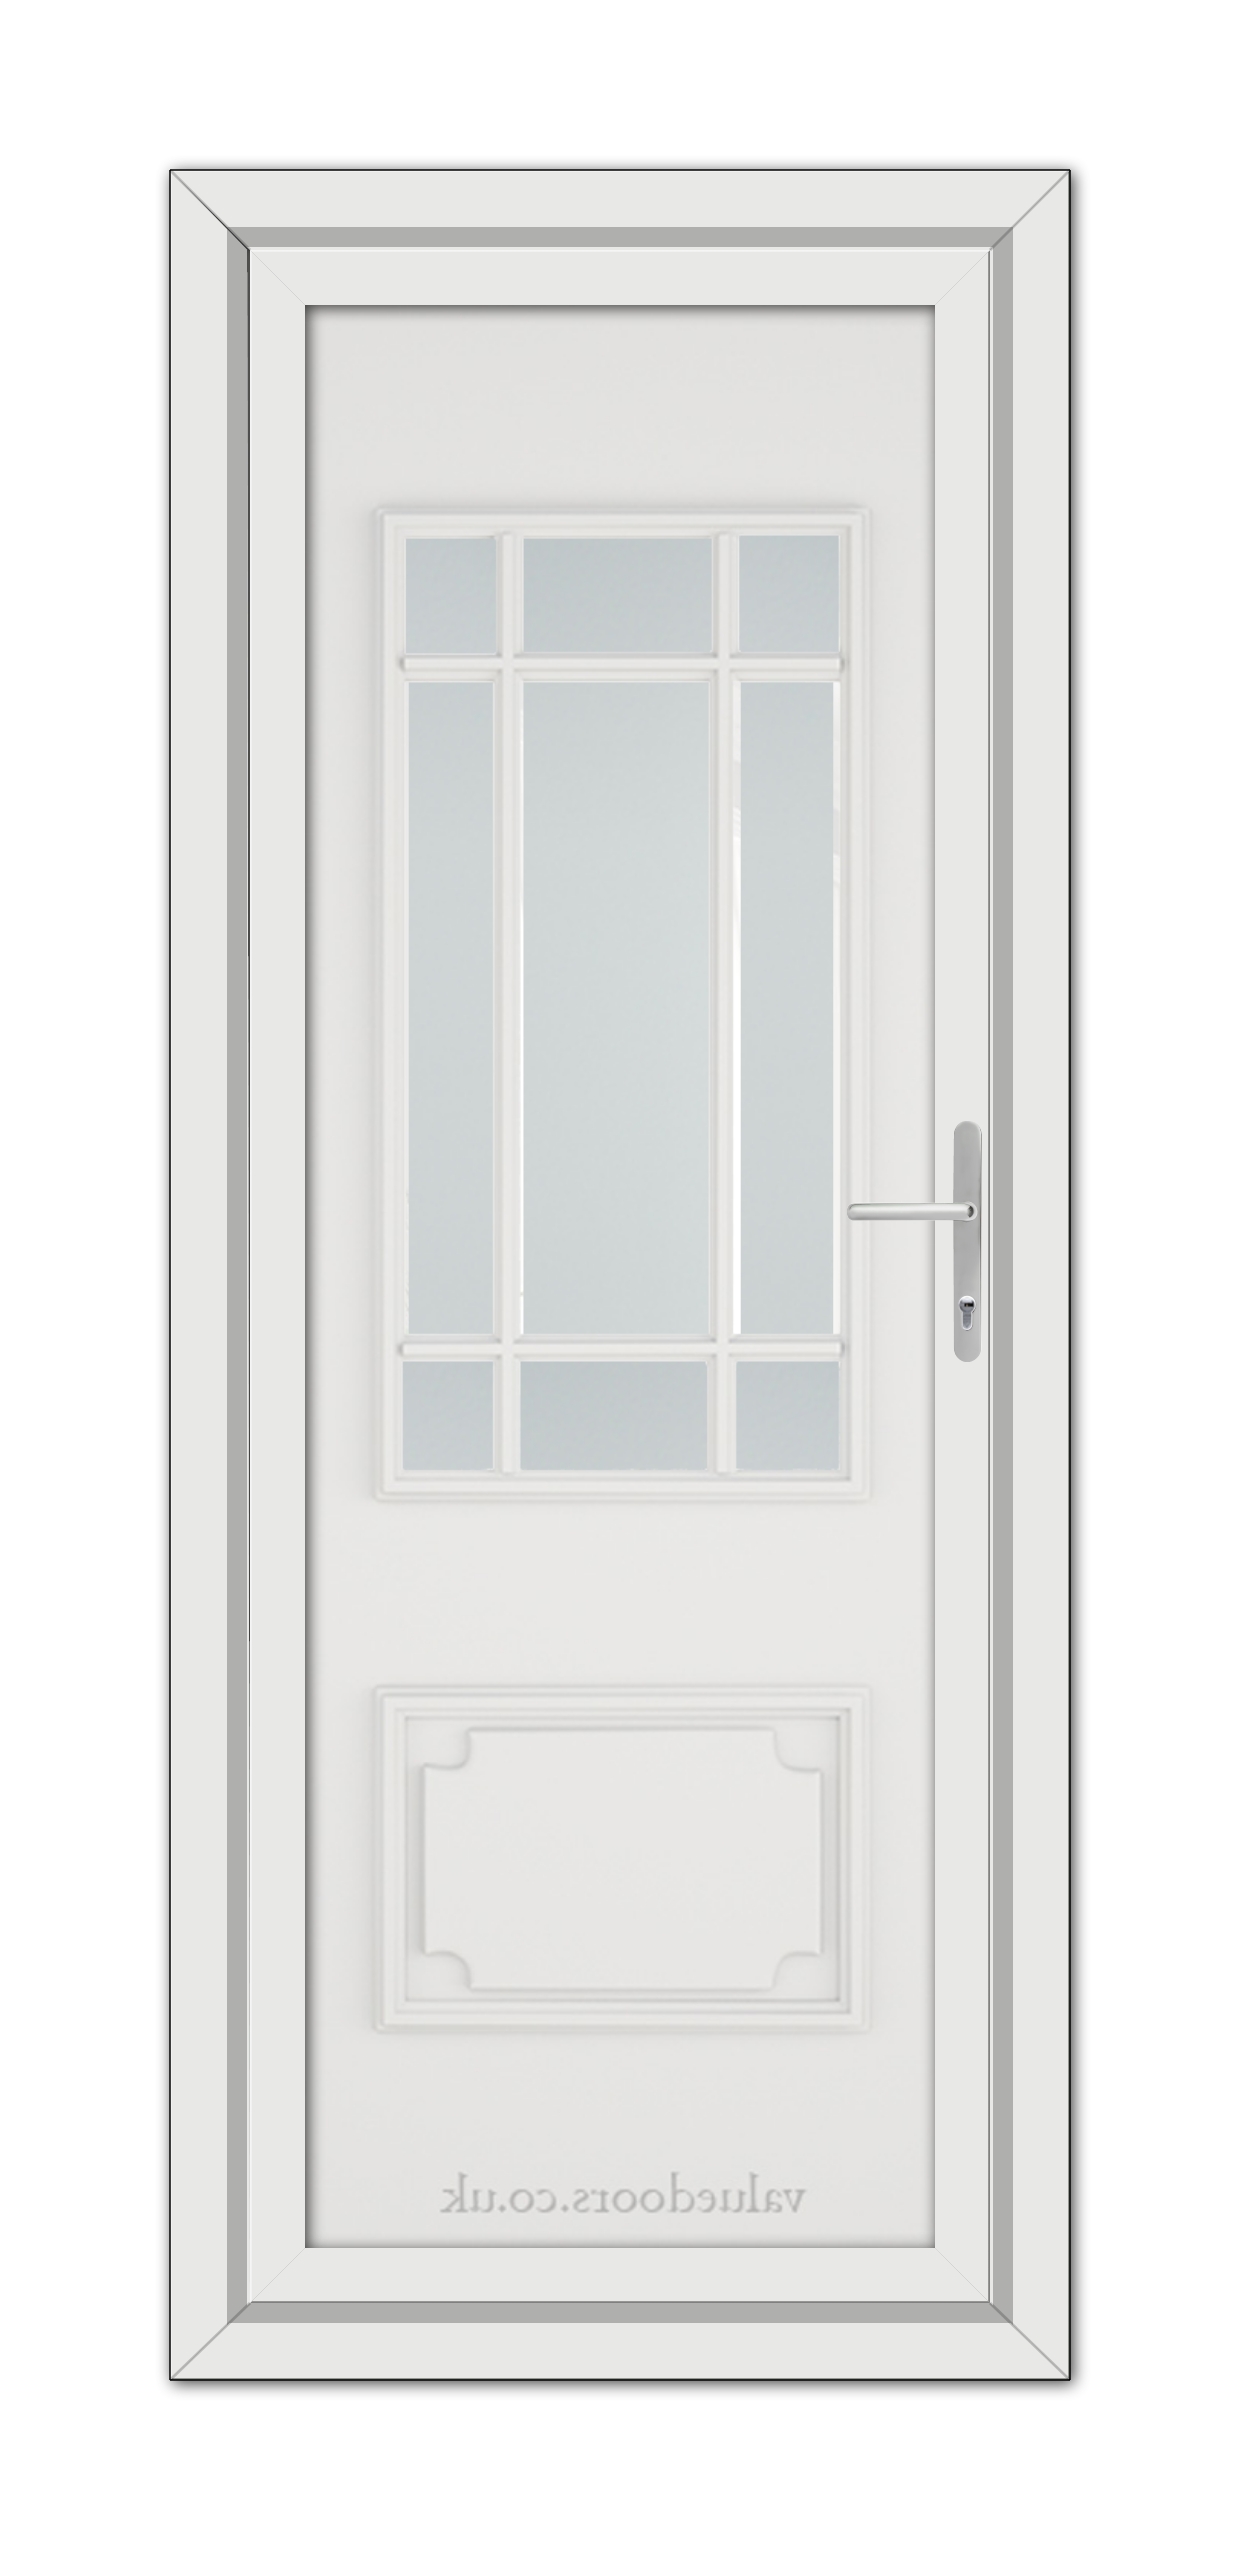 A White Seville uPVC Door featuring a vertical window with multiple glass panes near the top and a molded panel at the bottom, set in a simple frame.